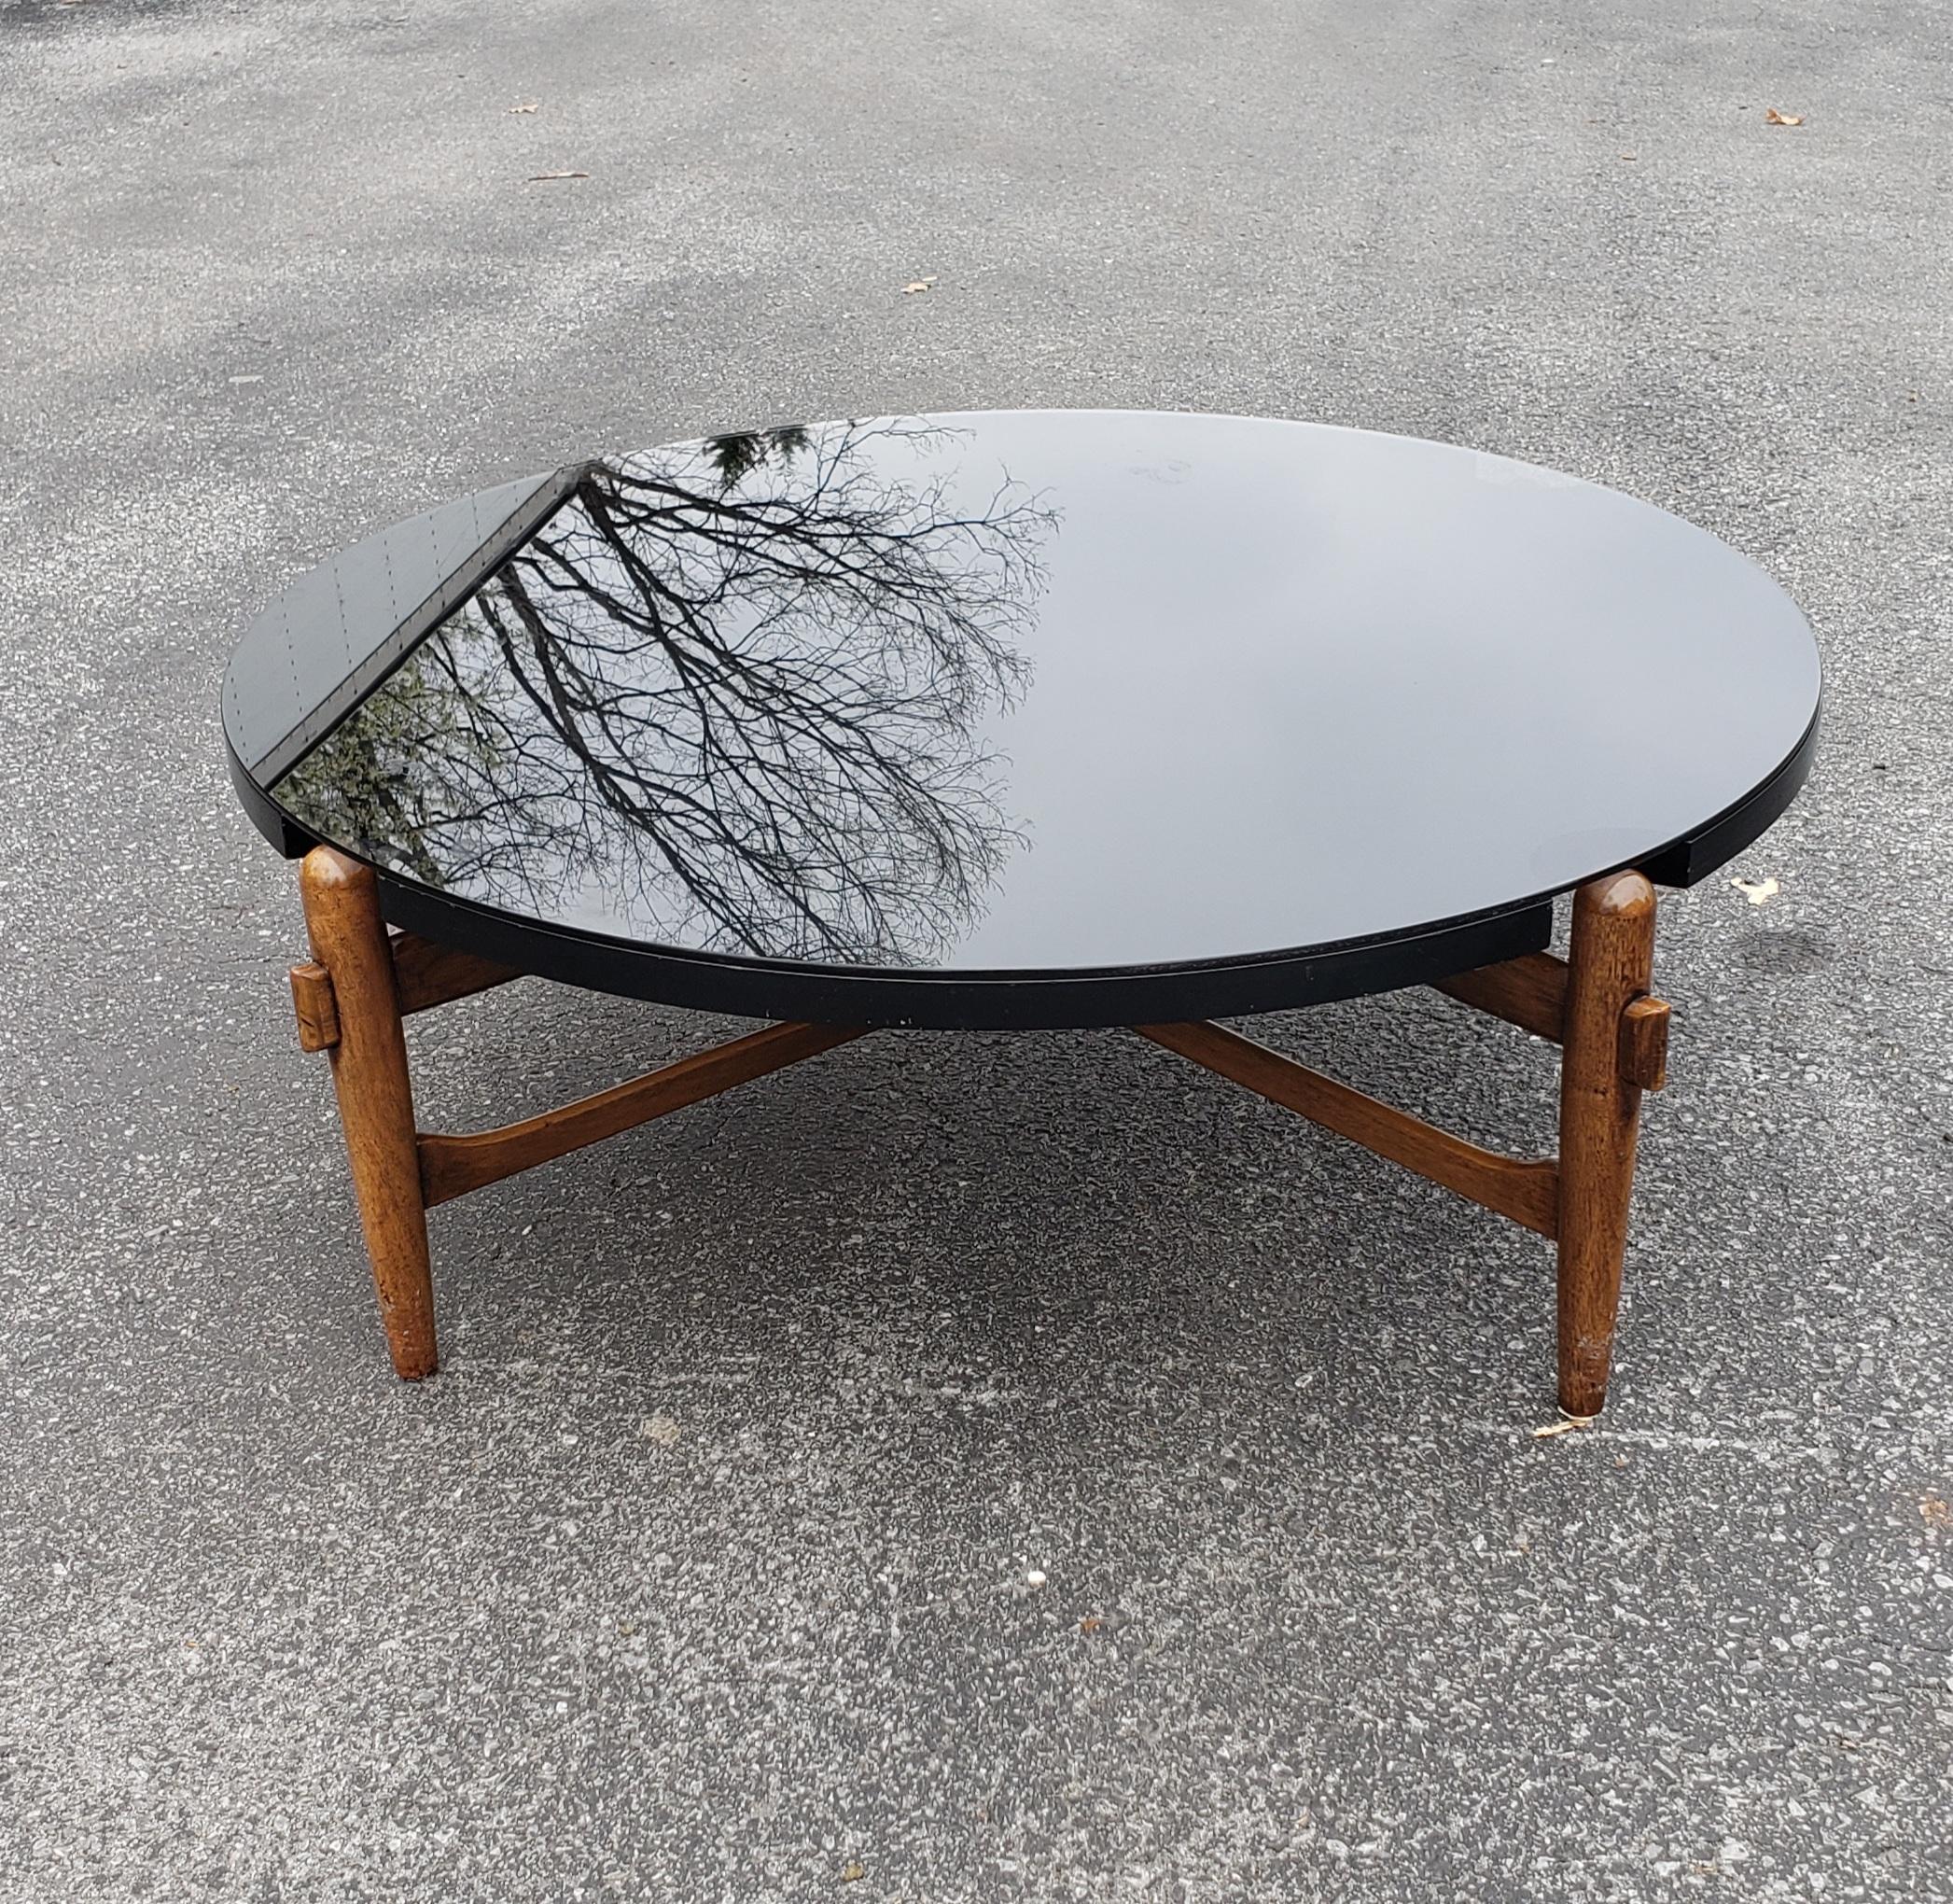 Other Greta Grossman Danish Modern Walnut with Laminate and Glass Top Coffee Table For Sale